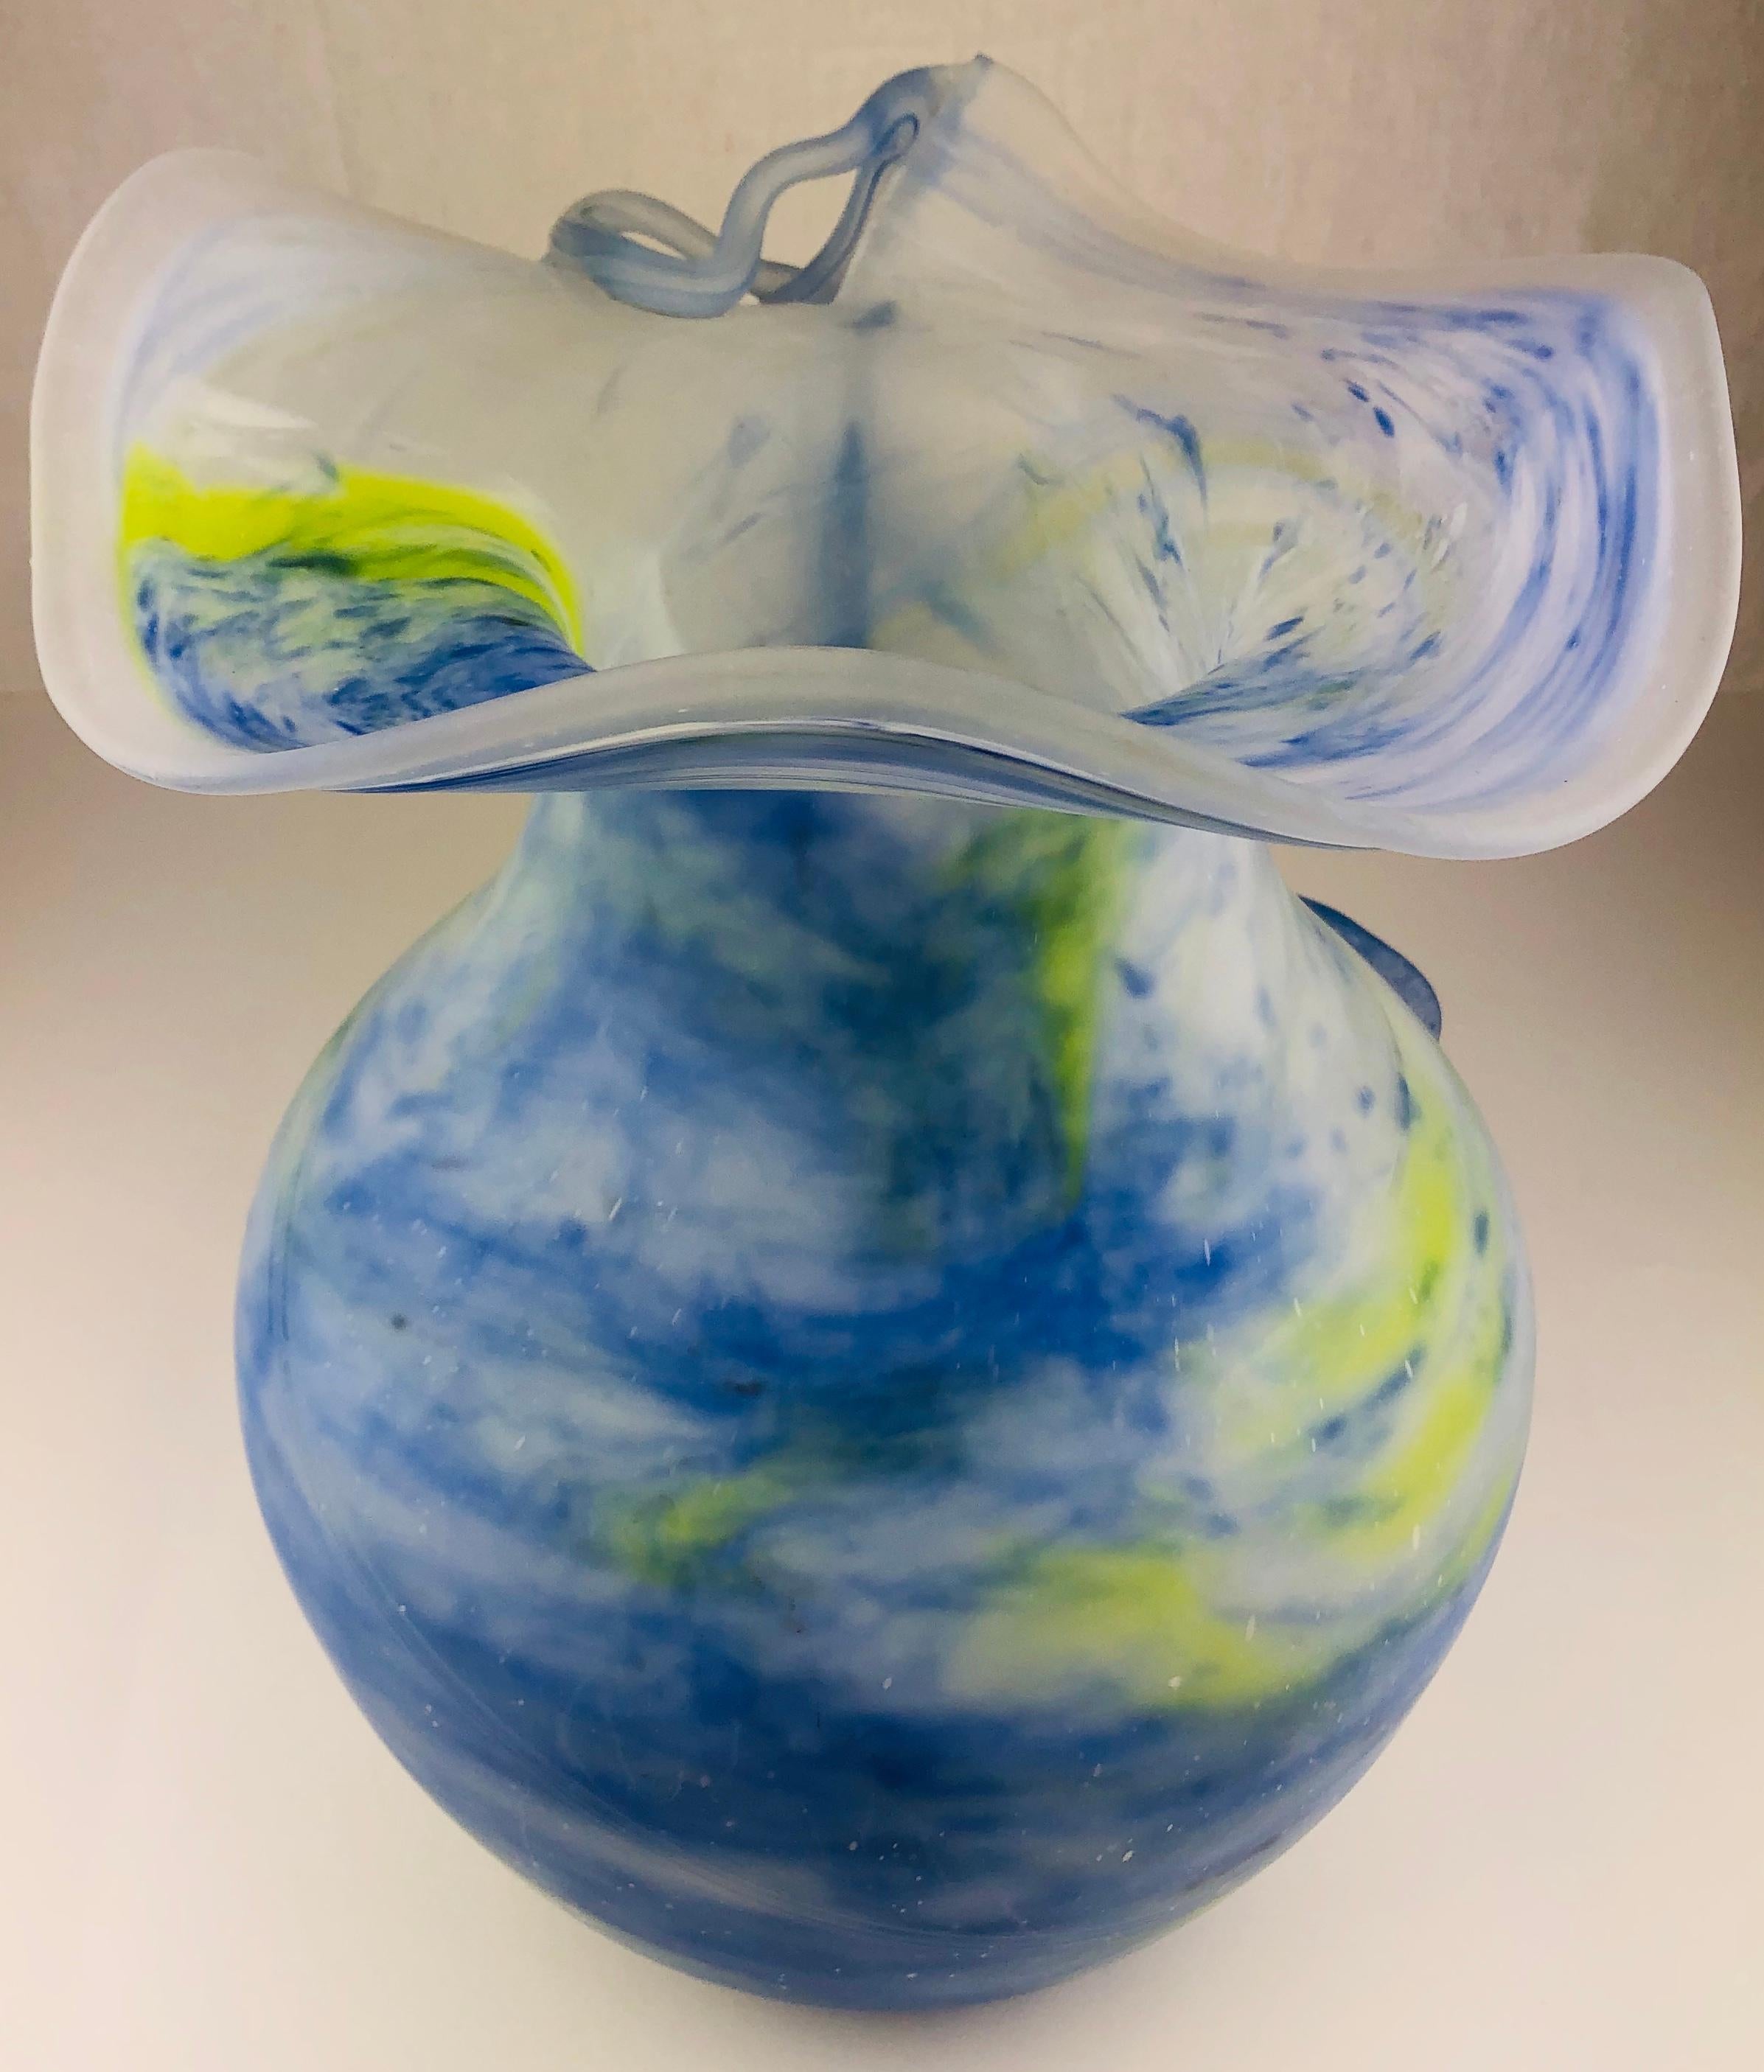 Large Midcentury French Pâte de Verre or Molten Art Glass Vase In Good Condition For Sale In Miami, FL